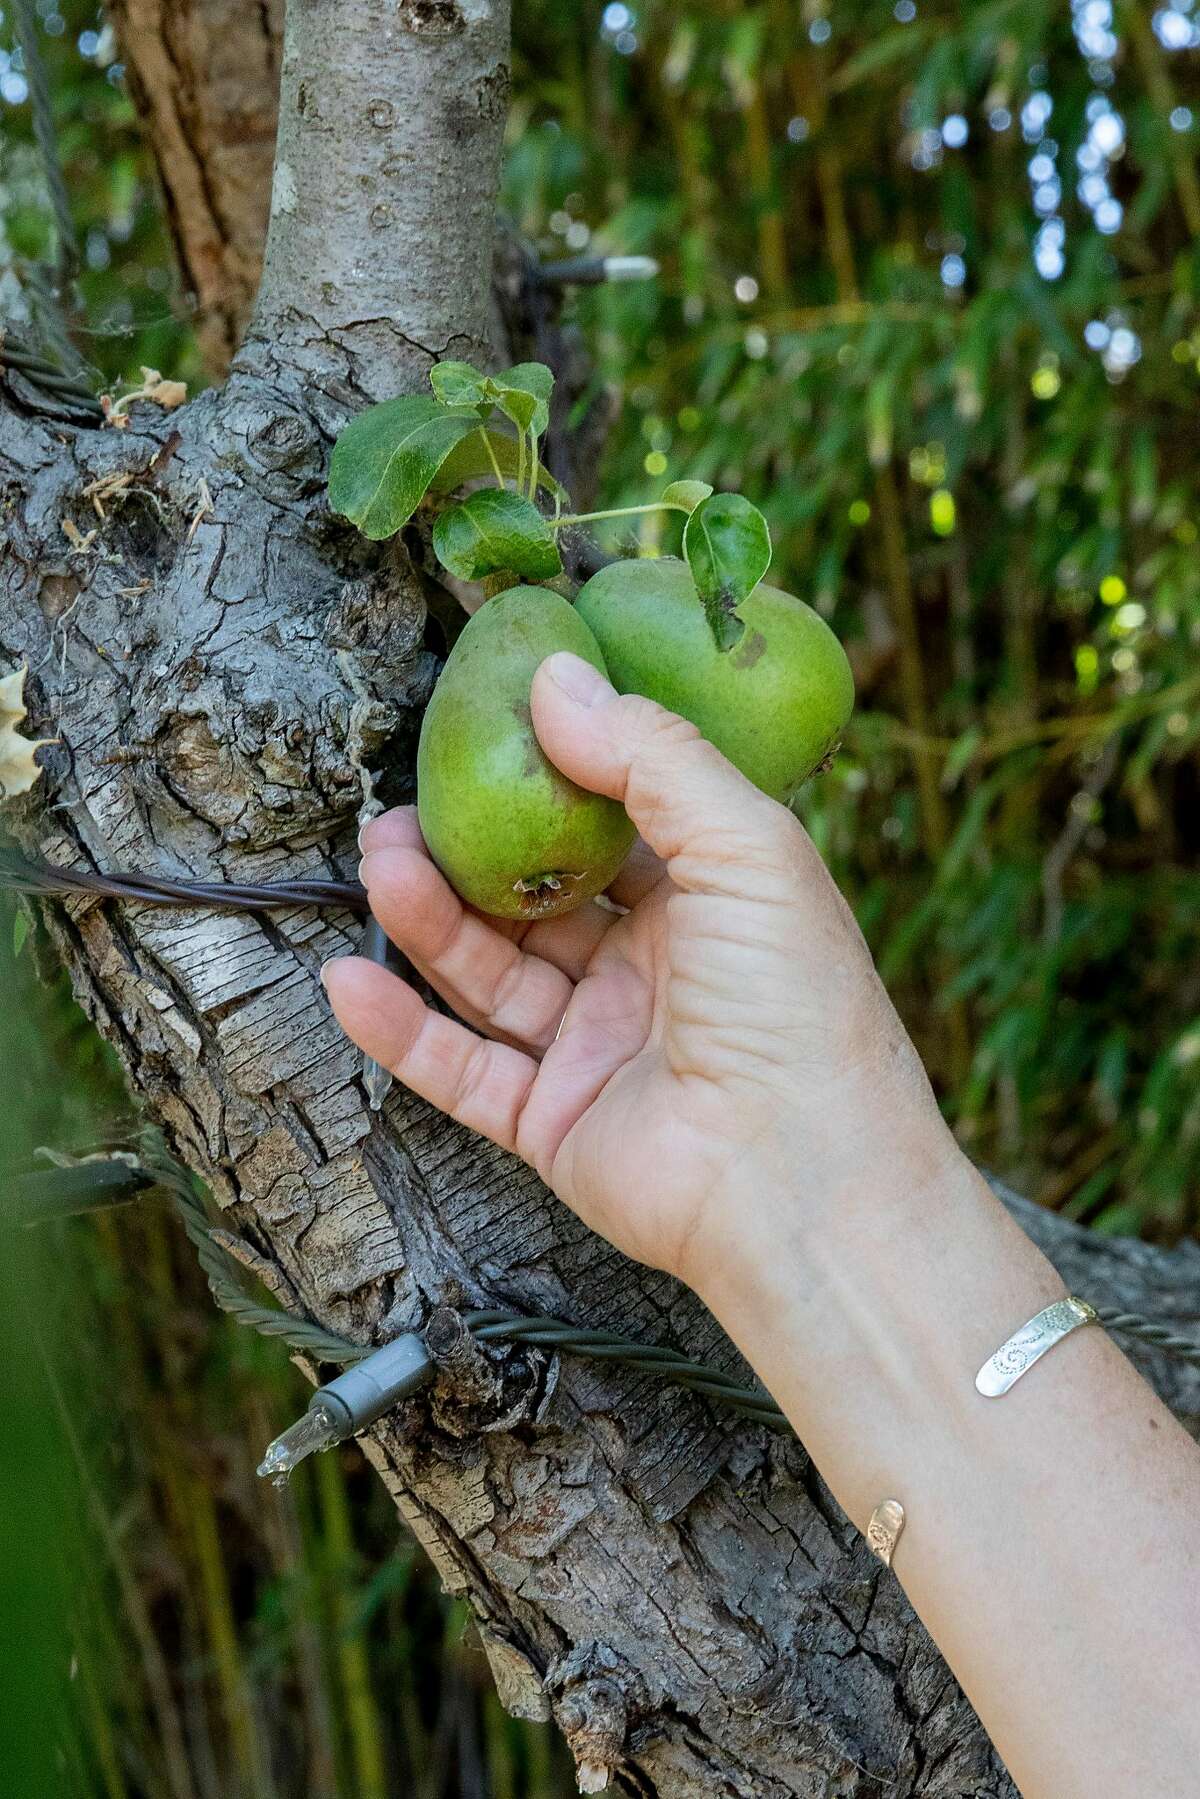 AnneMarie Martins picks a pear from a tree in the backyard garden at her home in Benicia, Calif. Tuesday, June 23, 2020. Martins was laid off from her job as a booking agent for the music industry. She's planted an extra-big garden so she can donate produce to food banks.